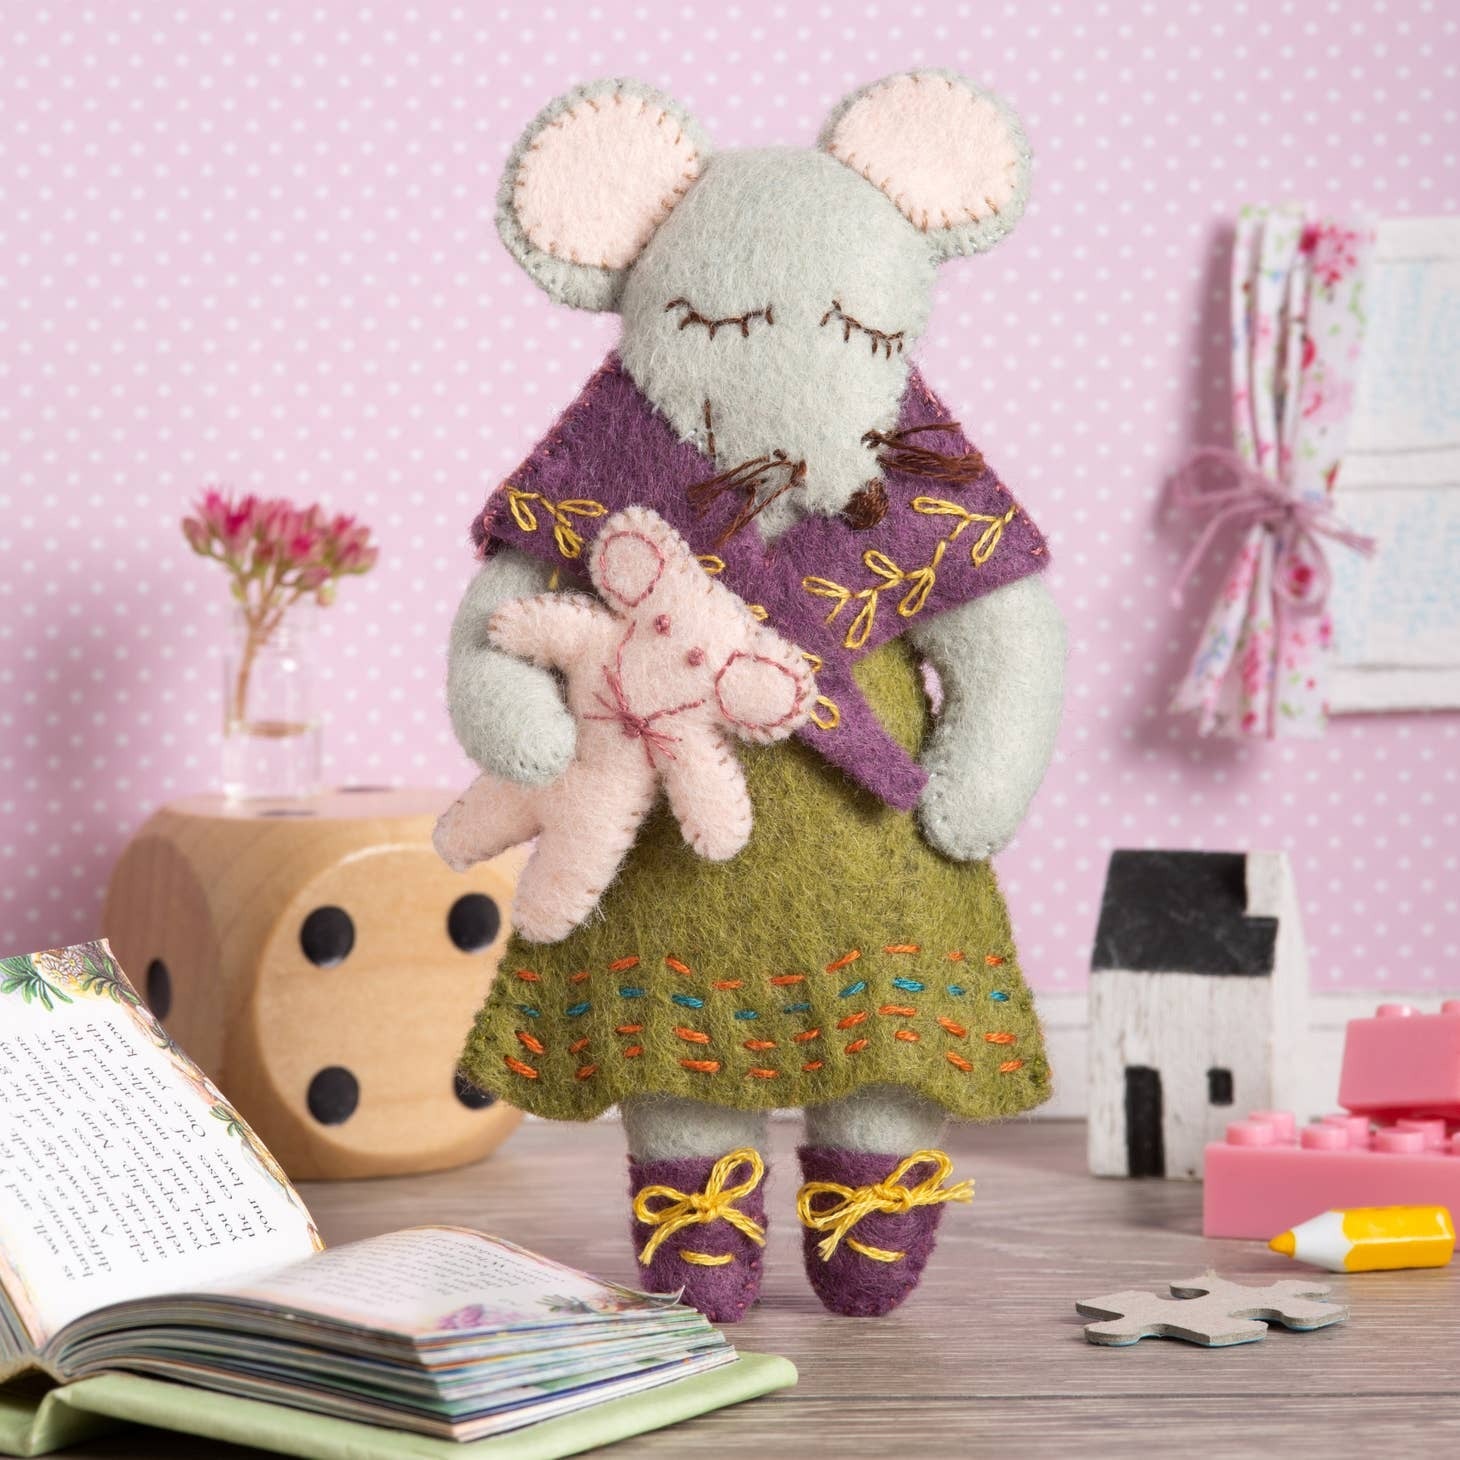 Handcrafted felt mouse figure from the 'Little Miss Mouse Felt Craft Mini Kit', showcasing a delicately dressed mouse holding a soft pink toy against a playful pink polka dot backdrop, surrounded by crafting essentials like a storybook, ribbon-tied fabric, and wooden toys.